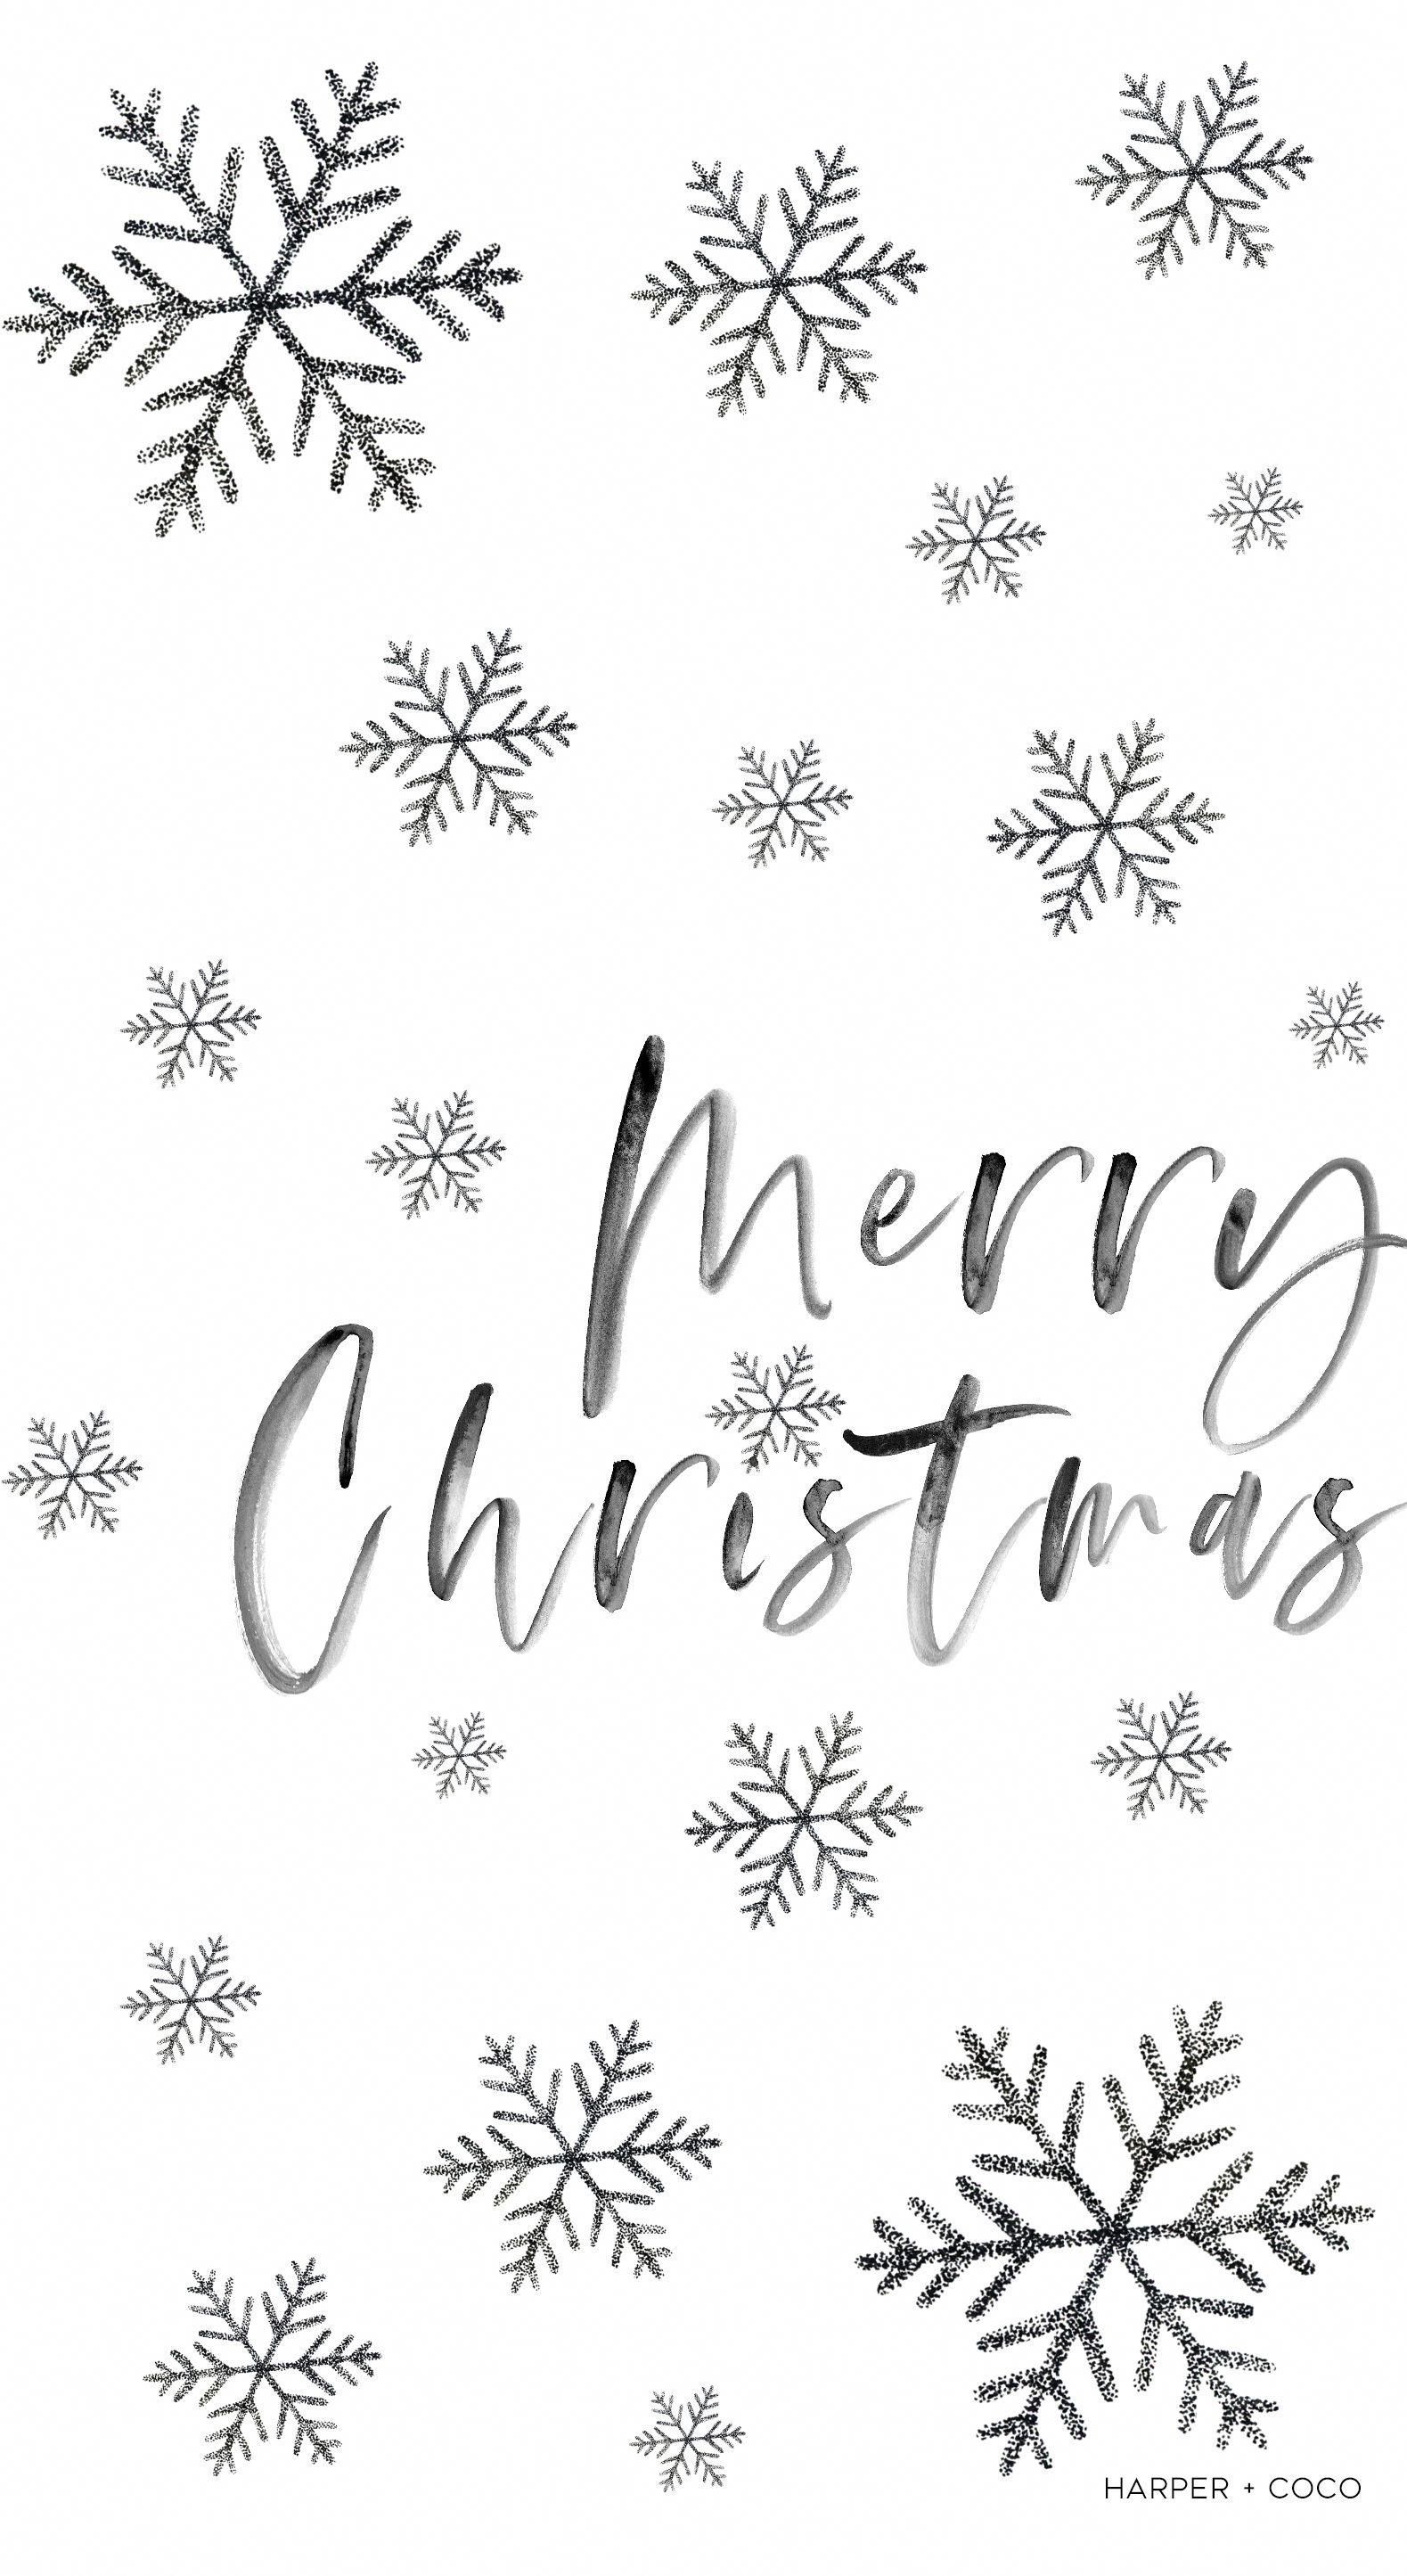 Merry Christmas iphone wallpaper. Black and white snowflakes wallpaper. # Christmas. Christmas phone wallpaper, Wallpaper iphone christmas, Snowflake wallpaper